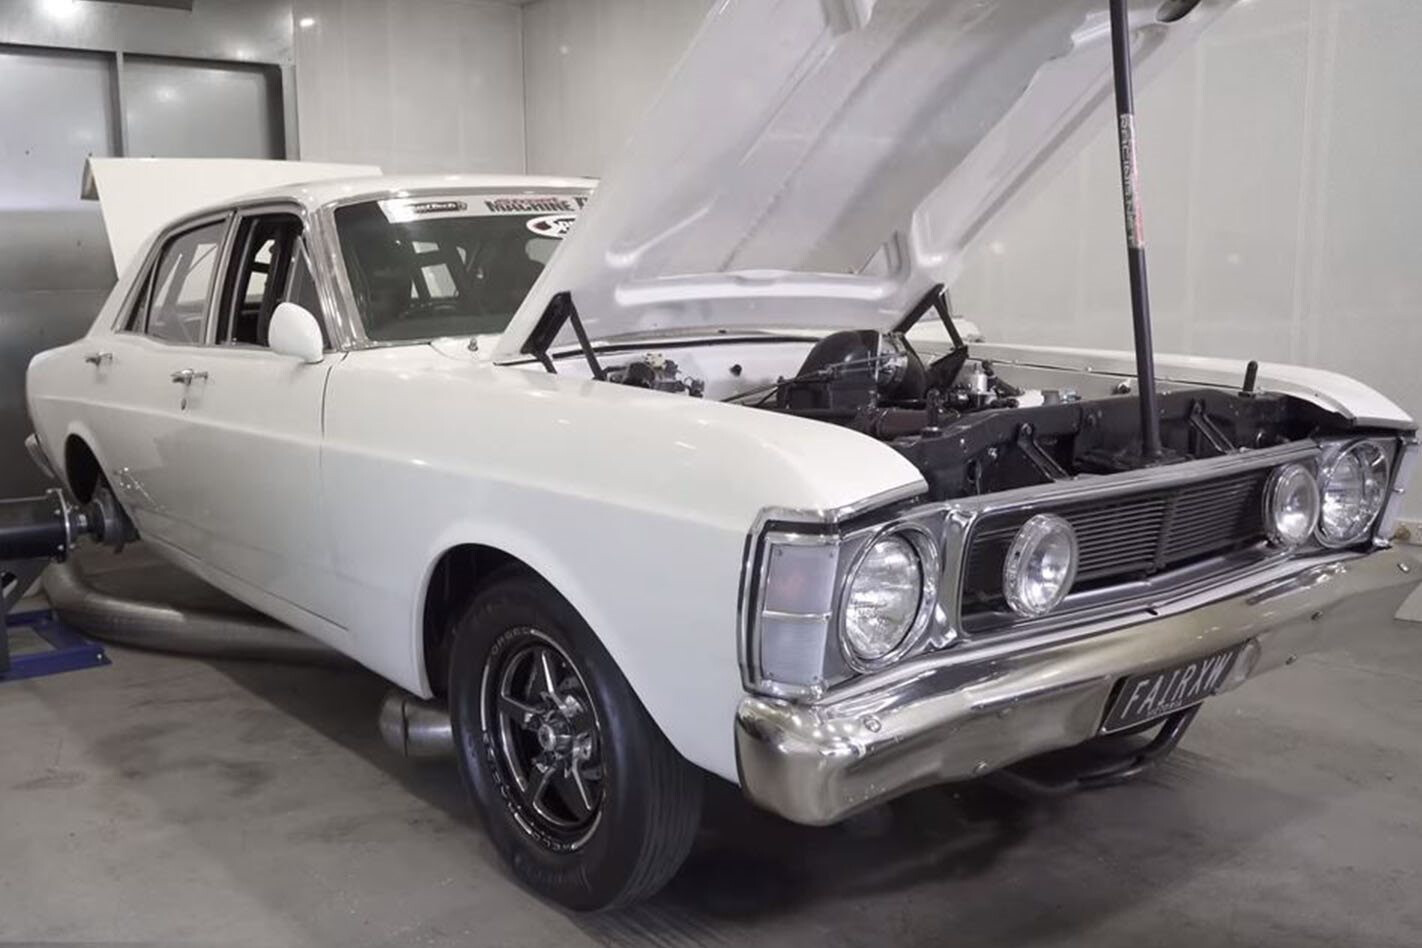 Dandy Engines 2800hp XW Falcon on the dyno – Video